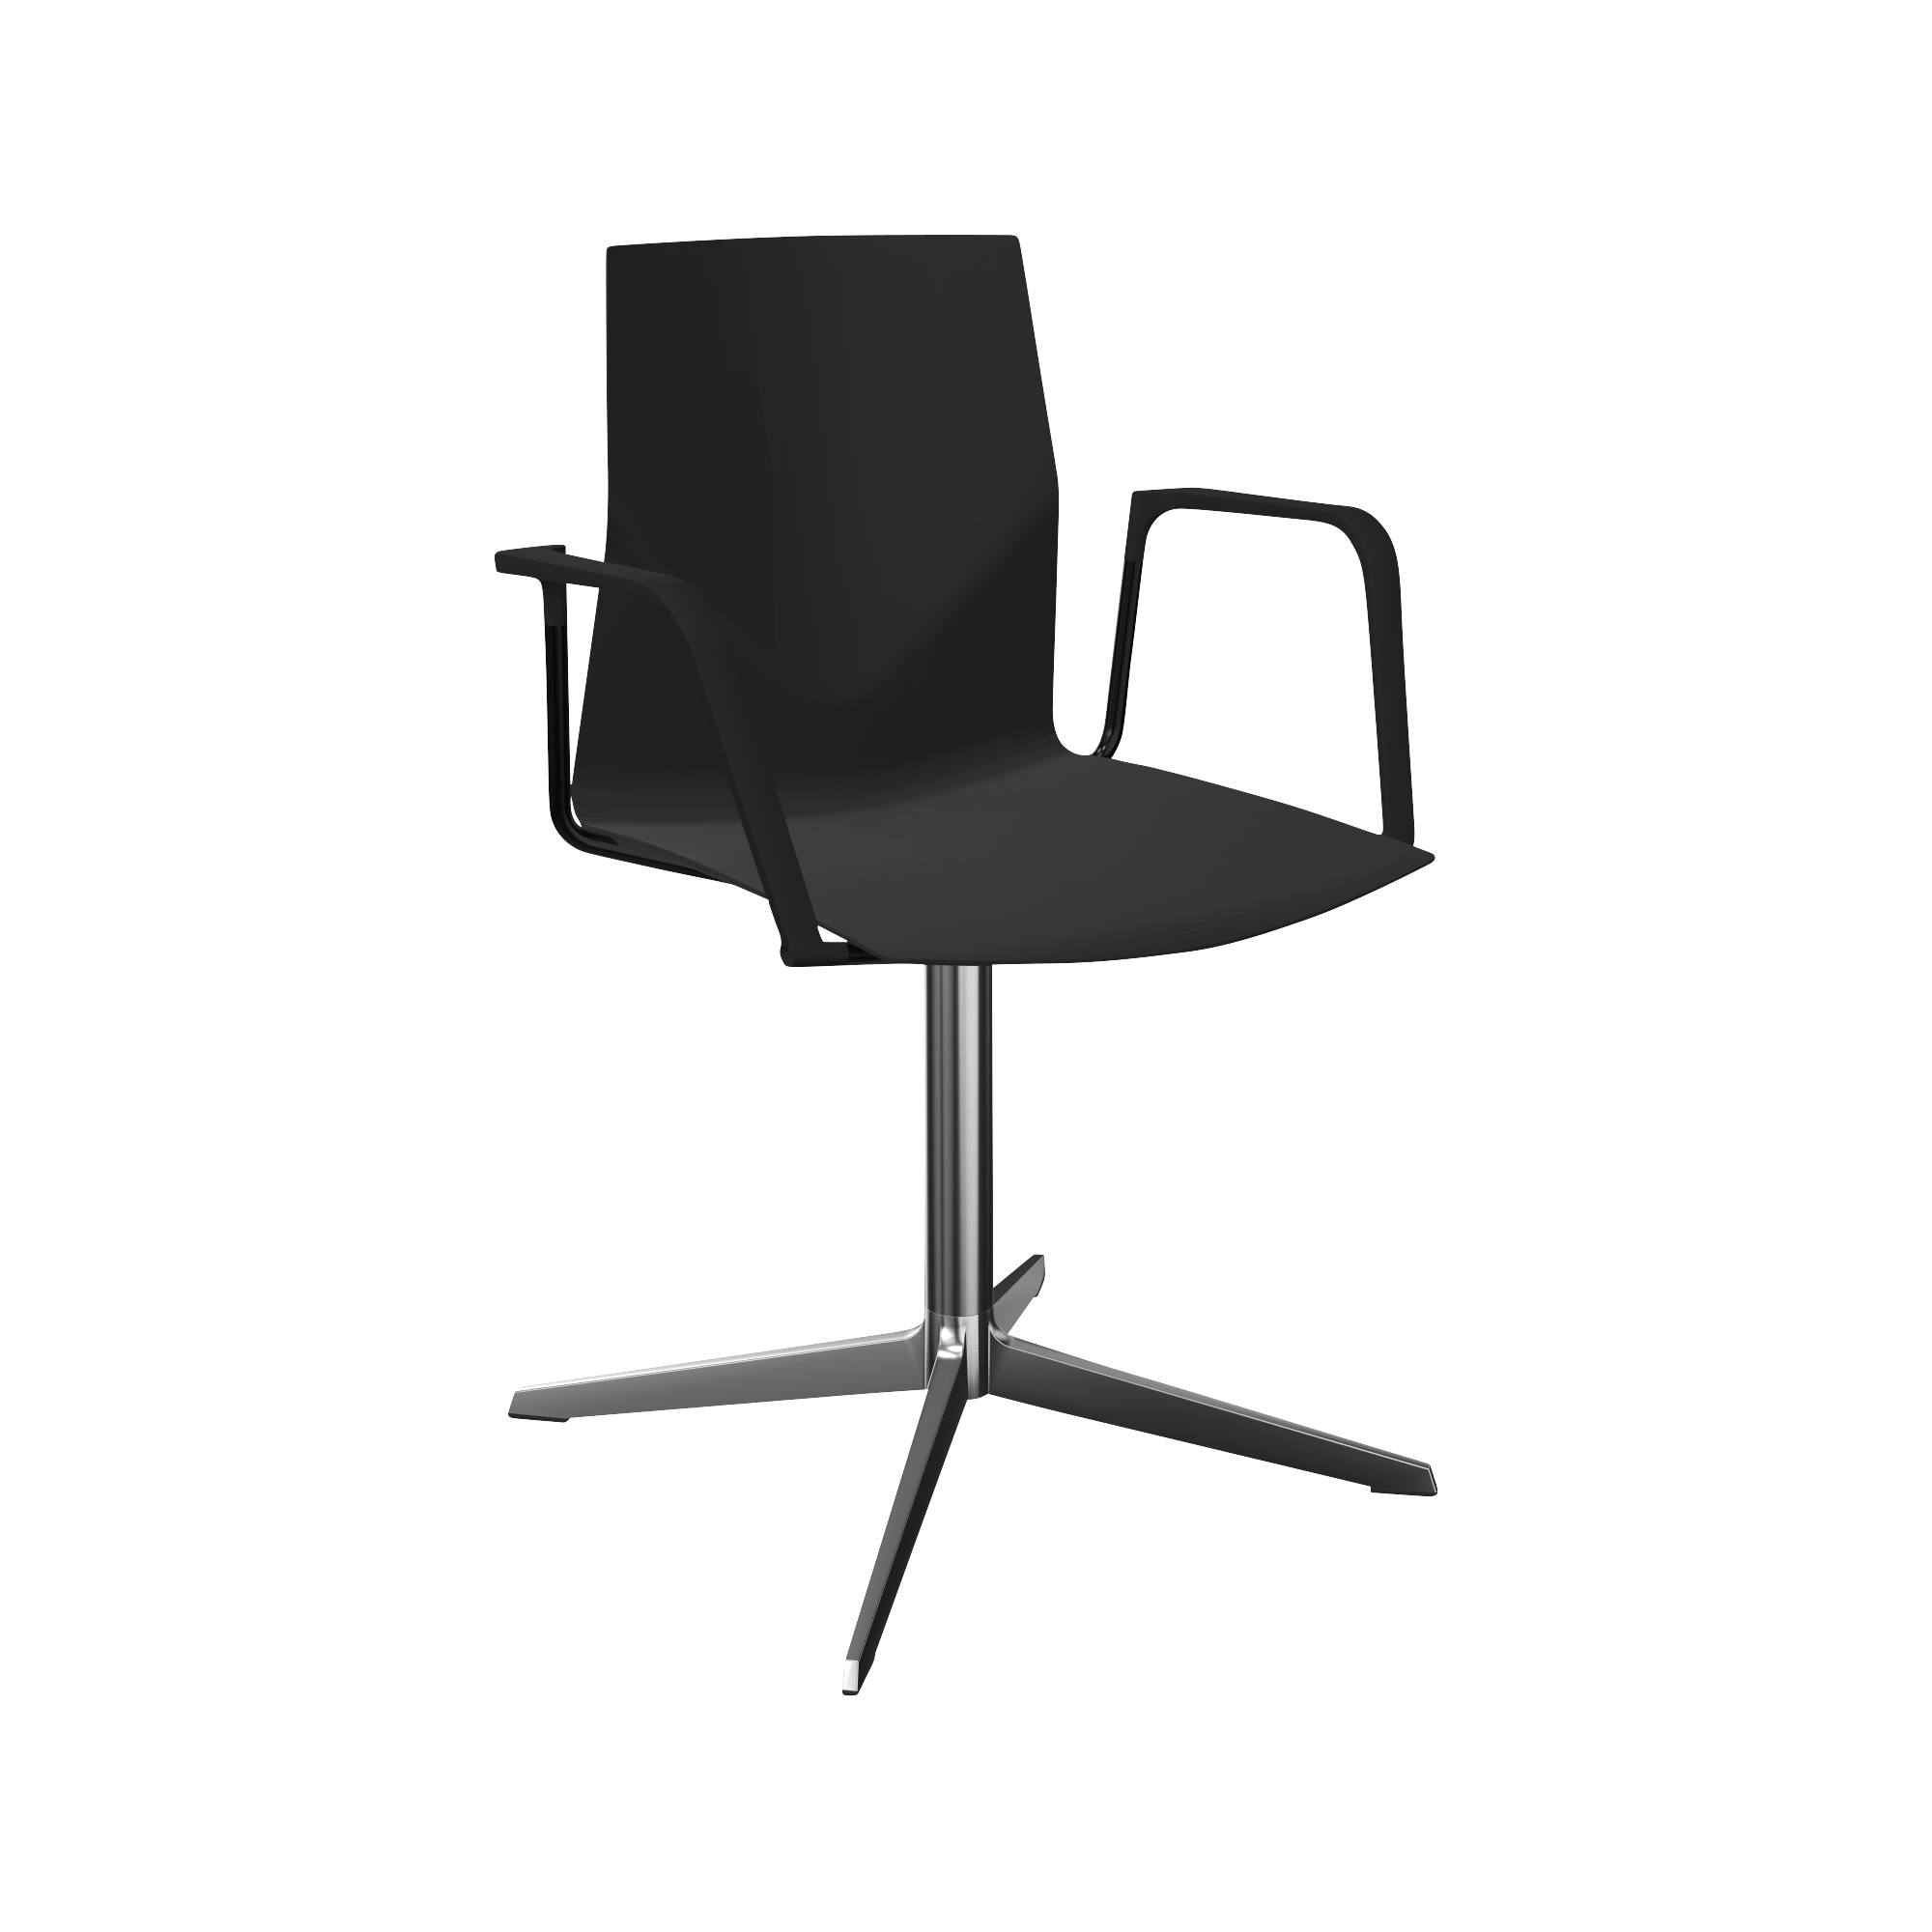 A black office chair with black arm rests and a chrome pedestal leg